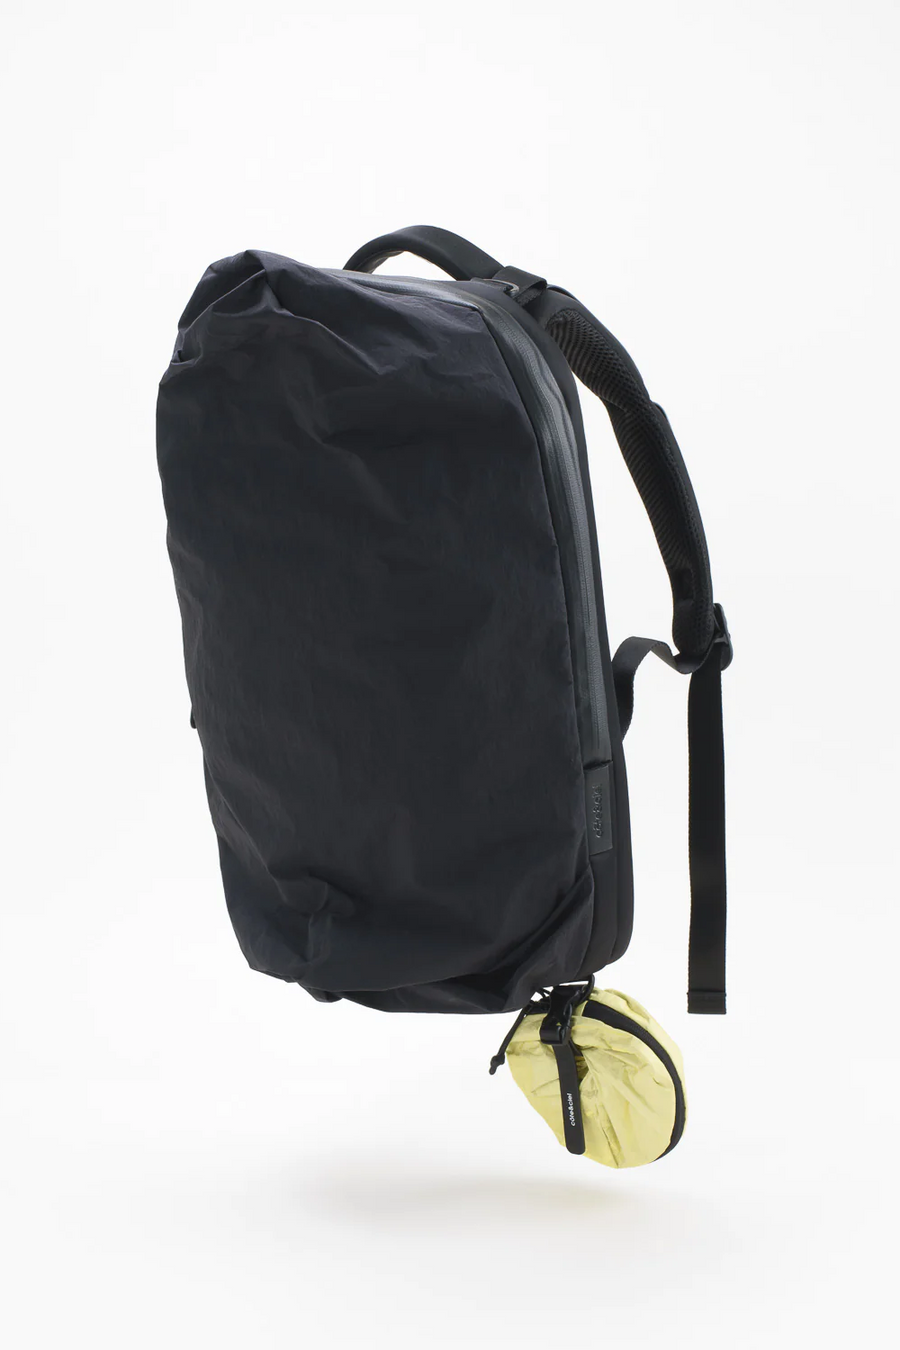 Buy the Cote & Ciel Ladon Komatsu Onibegie Nylon Backpack in Black at Intro. Spend £50 for free UK delivery. Official stockists. We ship worldwide.